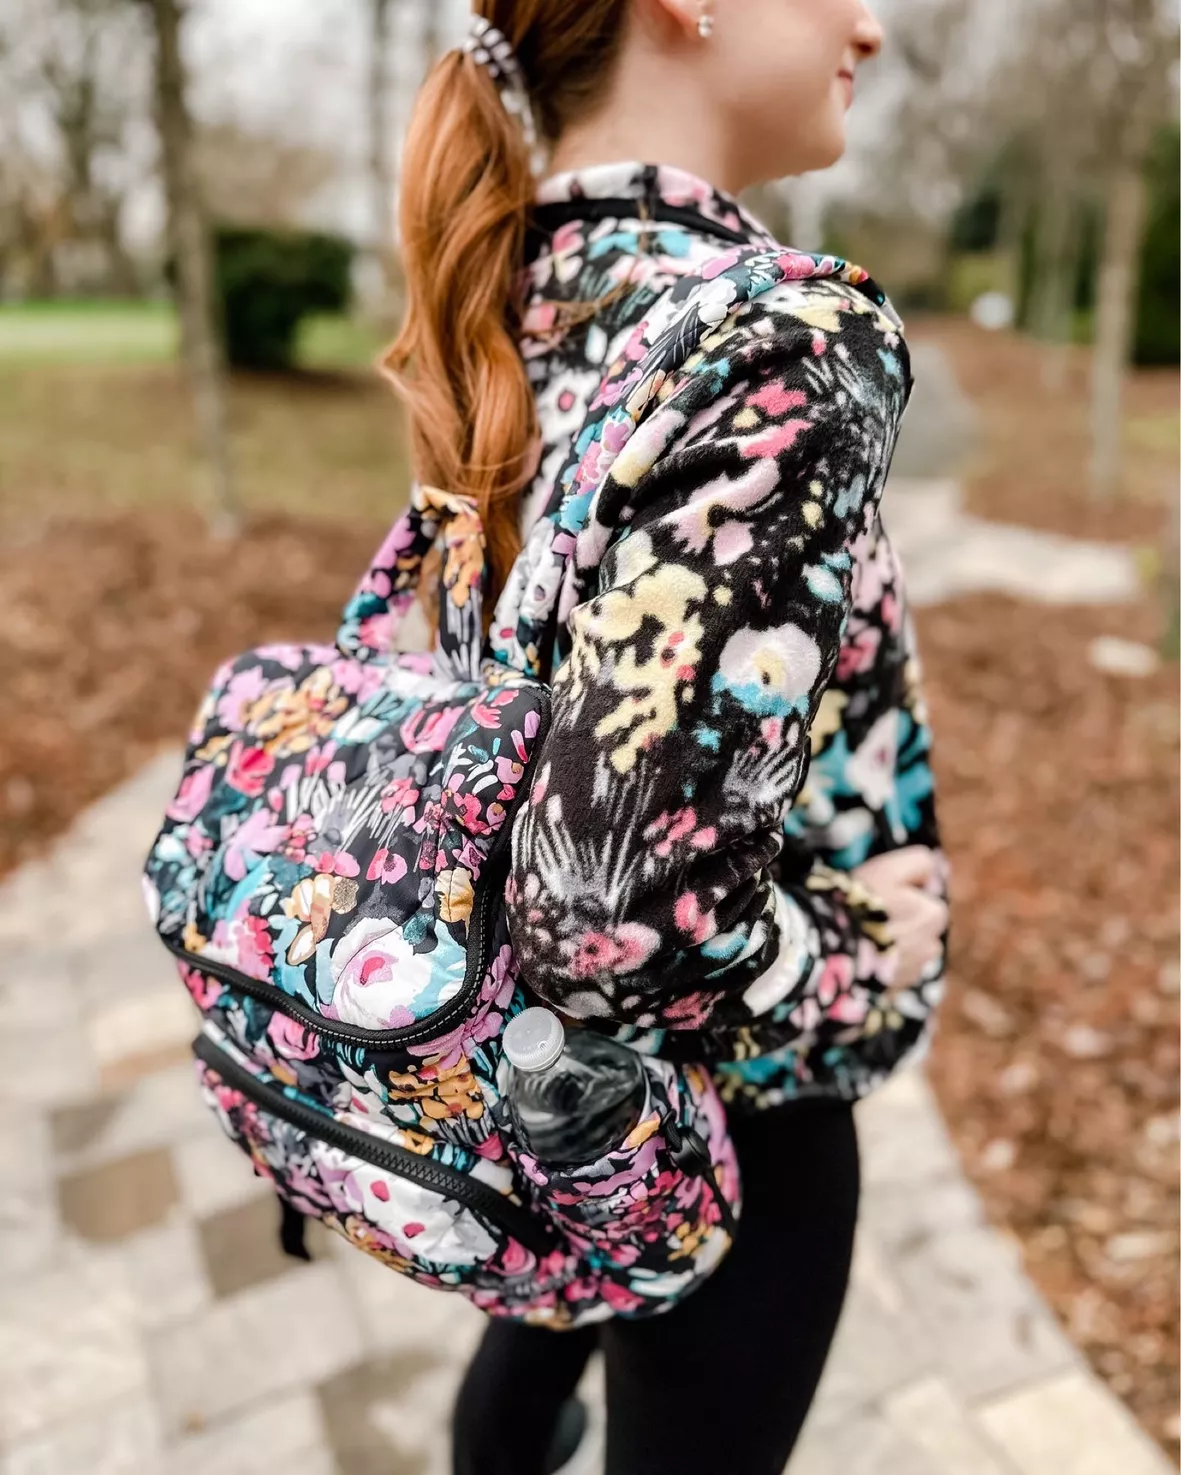 Lazy Gator Gifts on Instagram: New fall Vera Bradley is rolling in. Love  the new Featherweight collection. That Peacock Backpack is calling my name!  #shoplocal #verabradley #perfectgift